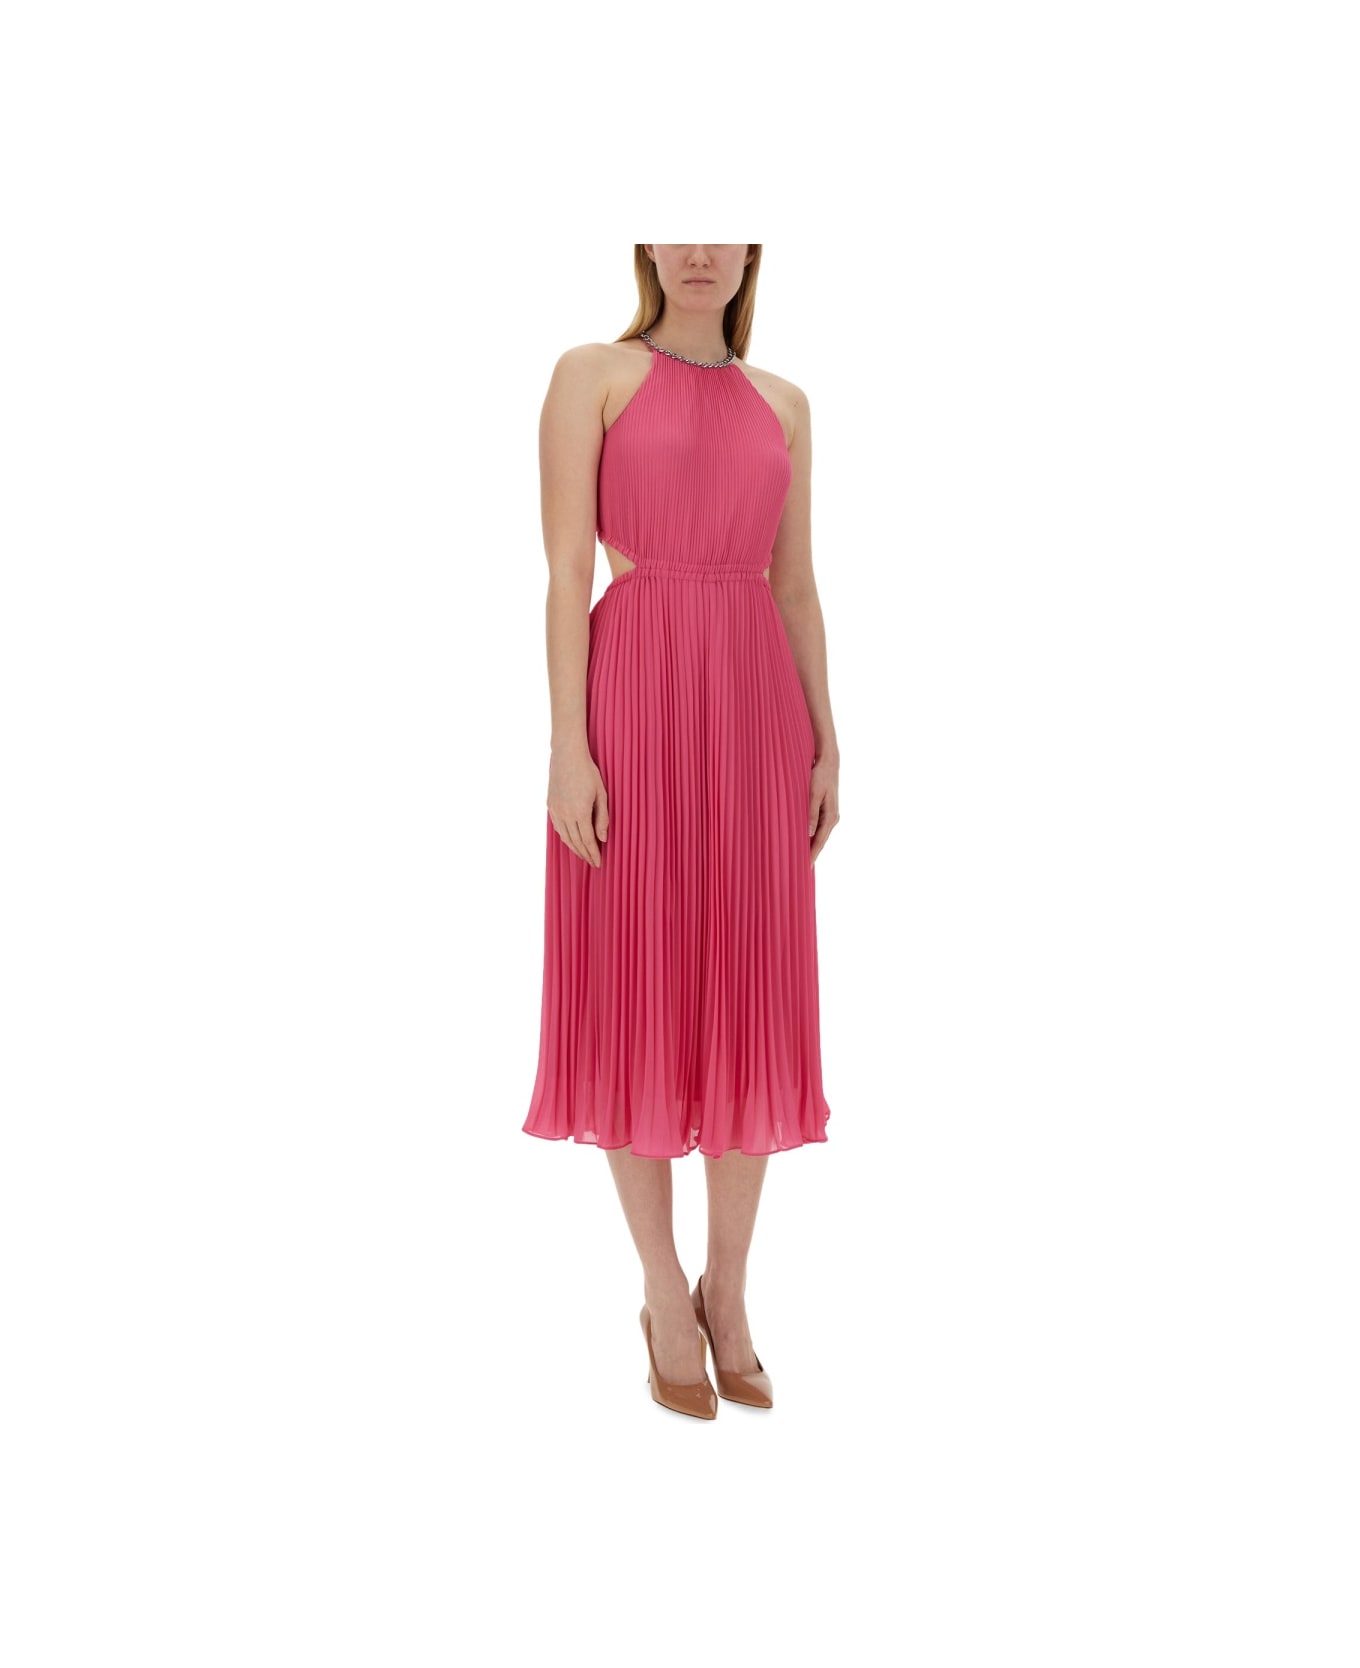 Michael Kors Pleated Georgette Dress With Cut-out Details - PINK